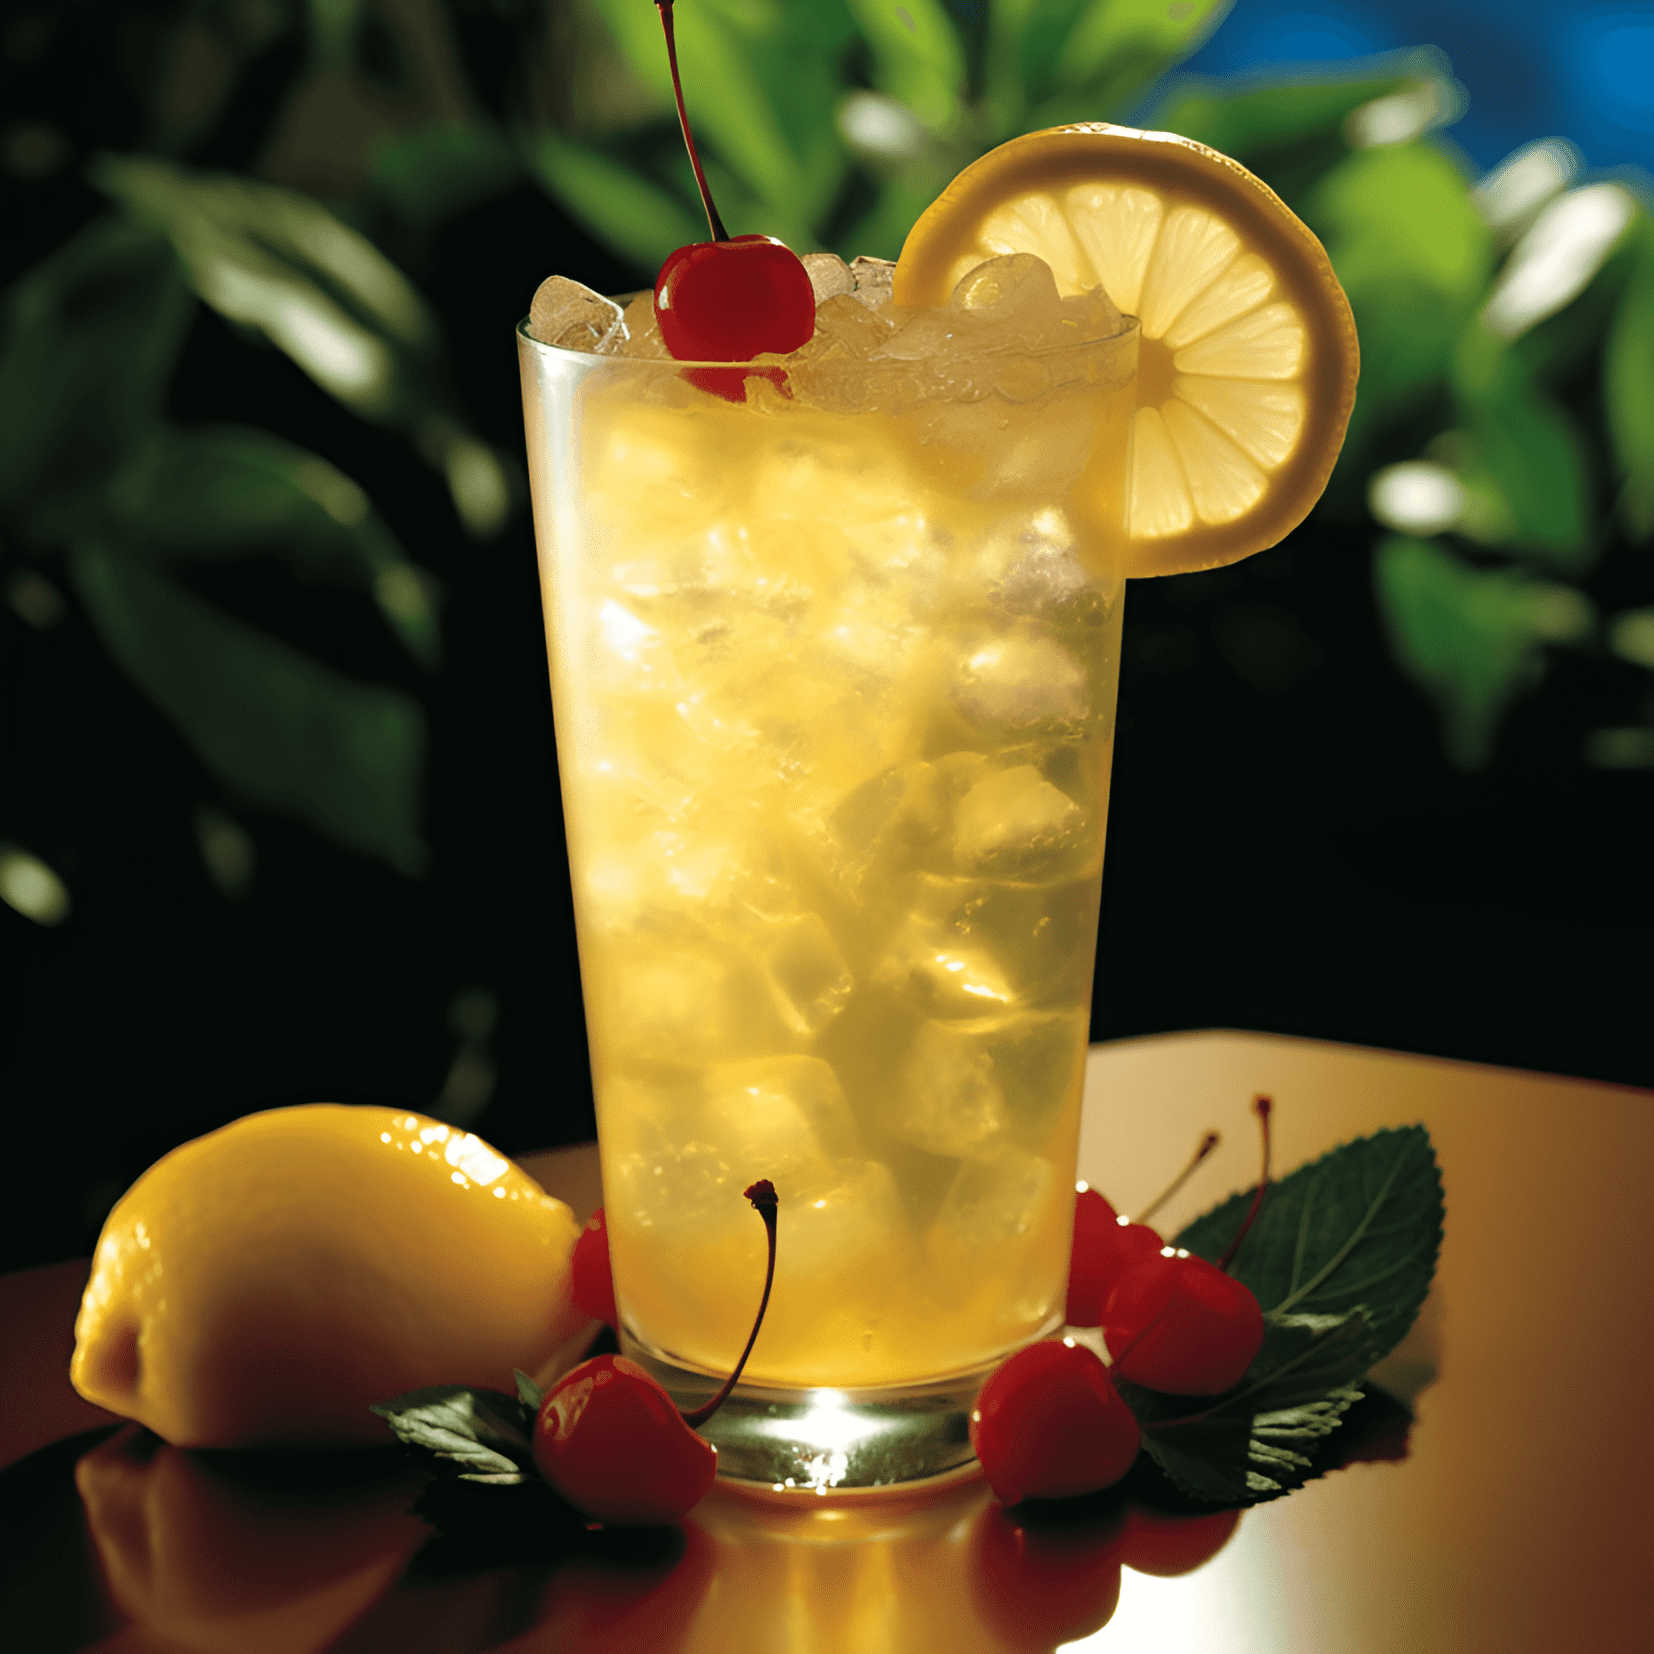 Lynchburg Lemonade Cocktail Recipe - The Lynchburg Lemonade has a refreshing, sweet, and tangy taste with a hint of whiskey warmth. It's a well-balanced mix of sour, sweet, and slightly bitter flavors, making it a perfect summer drink.